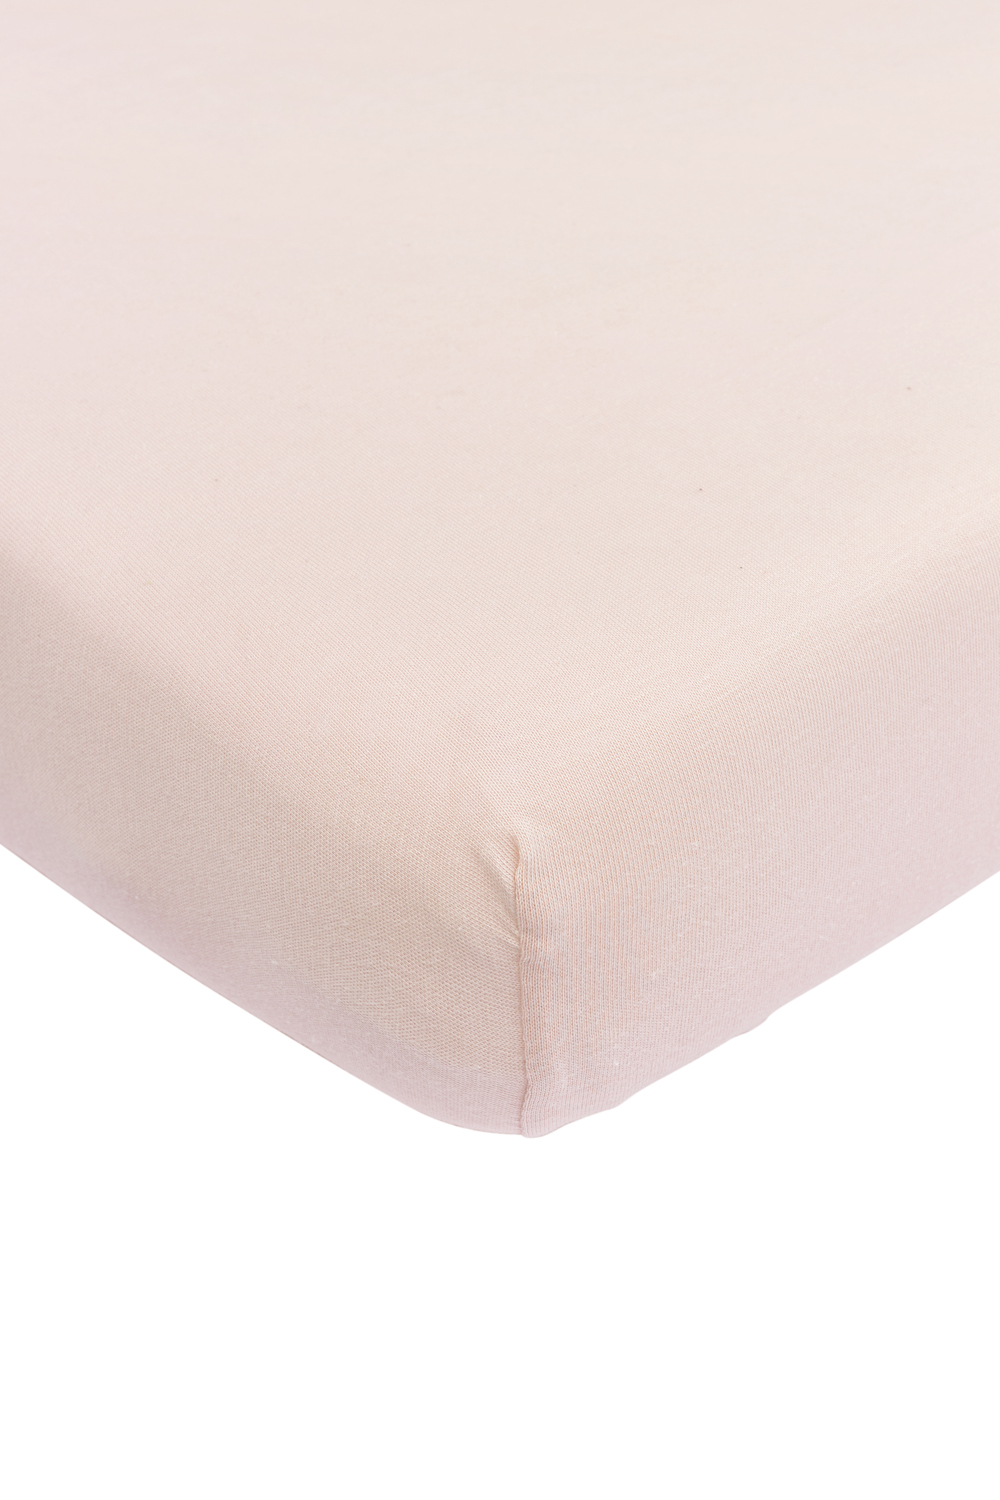 Fitted sheet juniorbed Uni - soft pink - 70x140/150cm